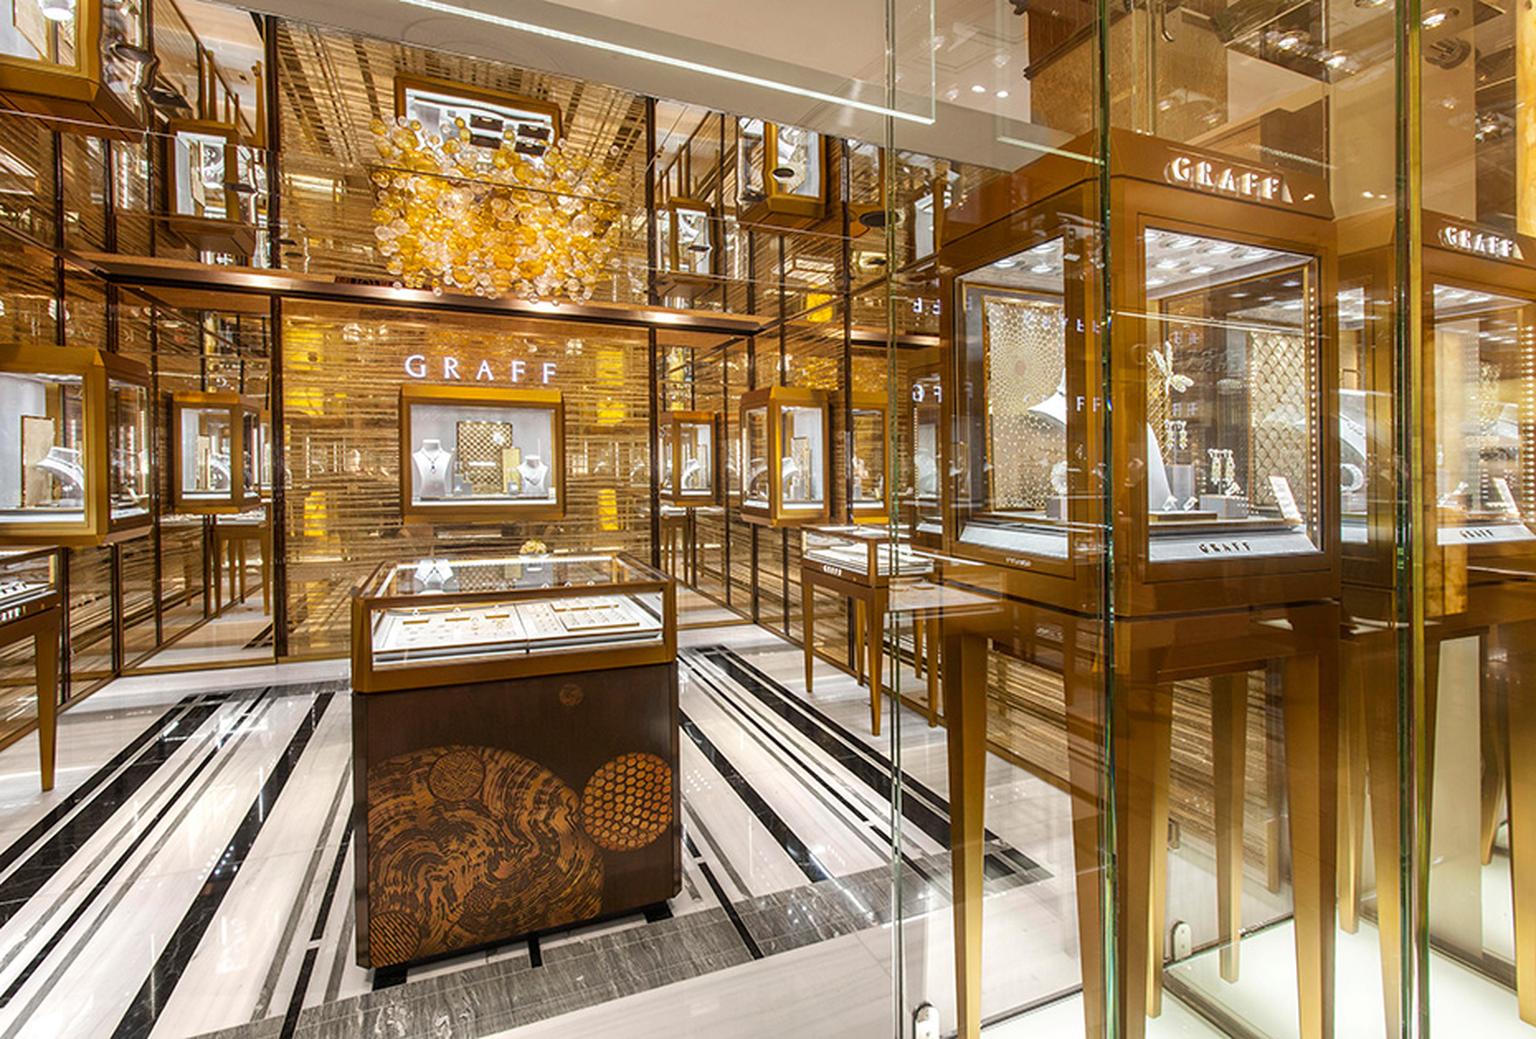 Graff, which currently has 45 flagship stores across the globe, was commended for its sustained increase in international operations over the last three years. Pictured is one of its latest openings - a new boutique in Harrods' Fine Jewellery Room.